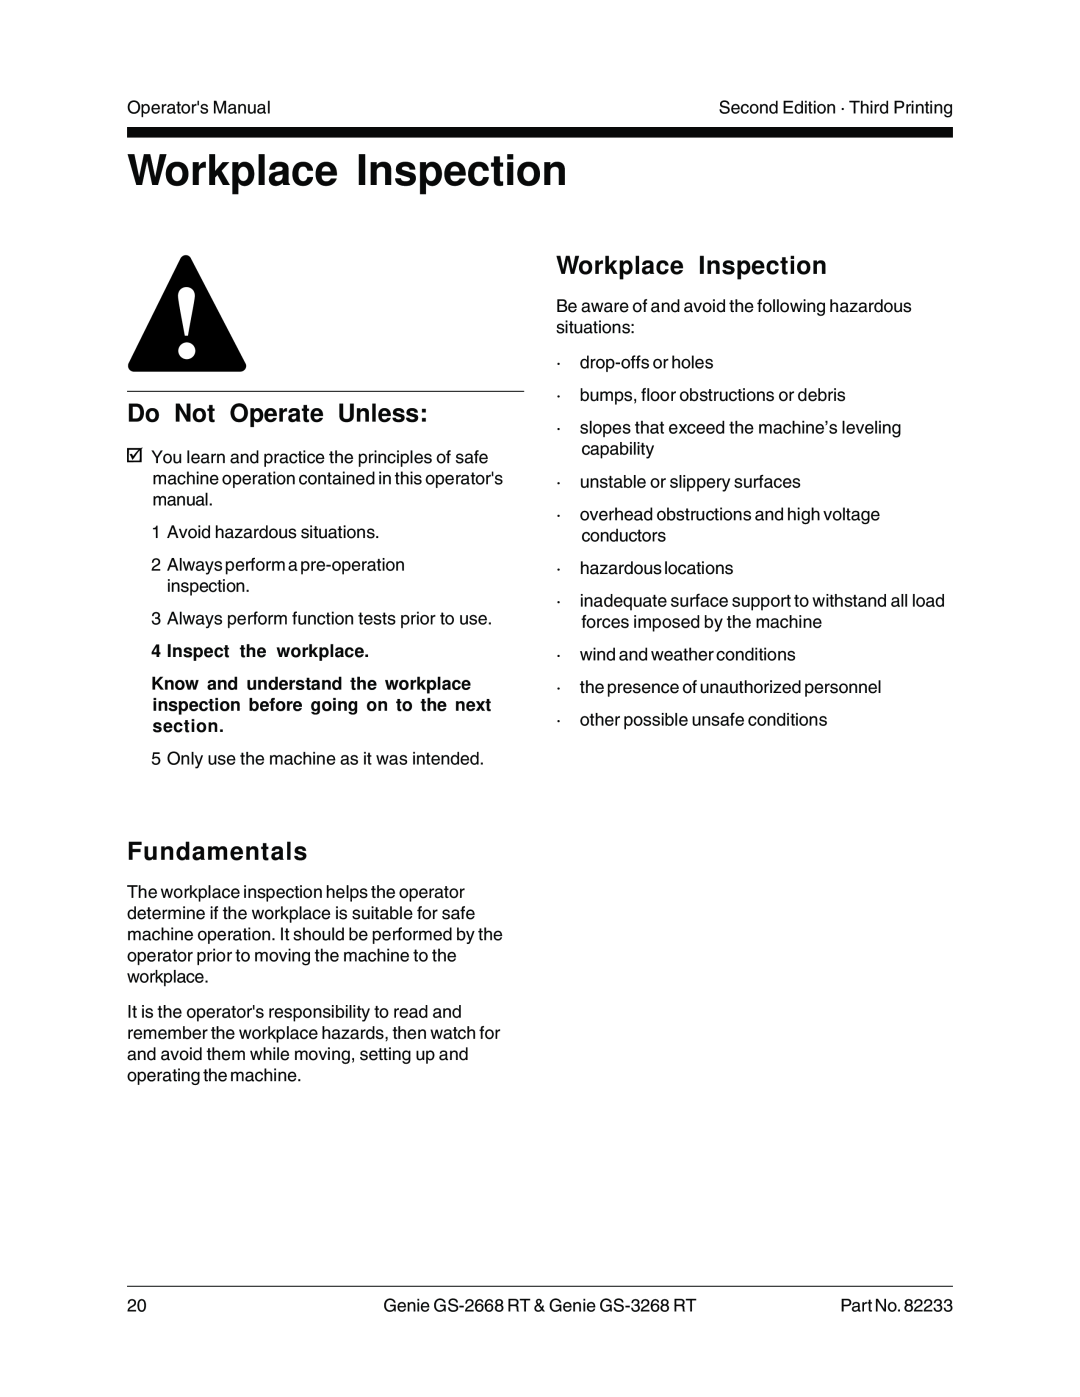 Genie GS-2668 RT, GS-3268 RT manual Workplace Inspection, Inspect the workplace, Do Not Operate Unless, Fundamentals 